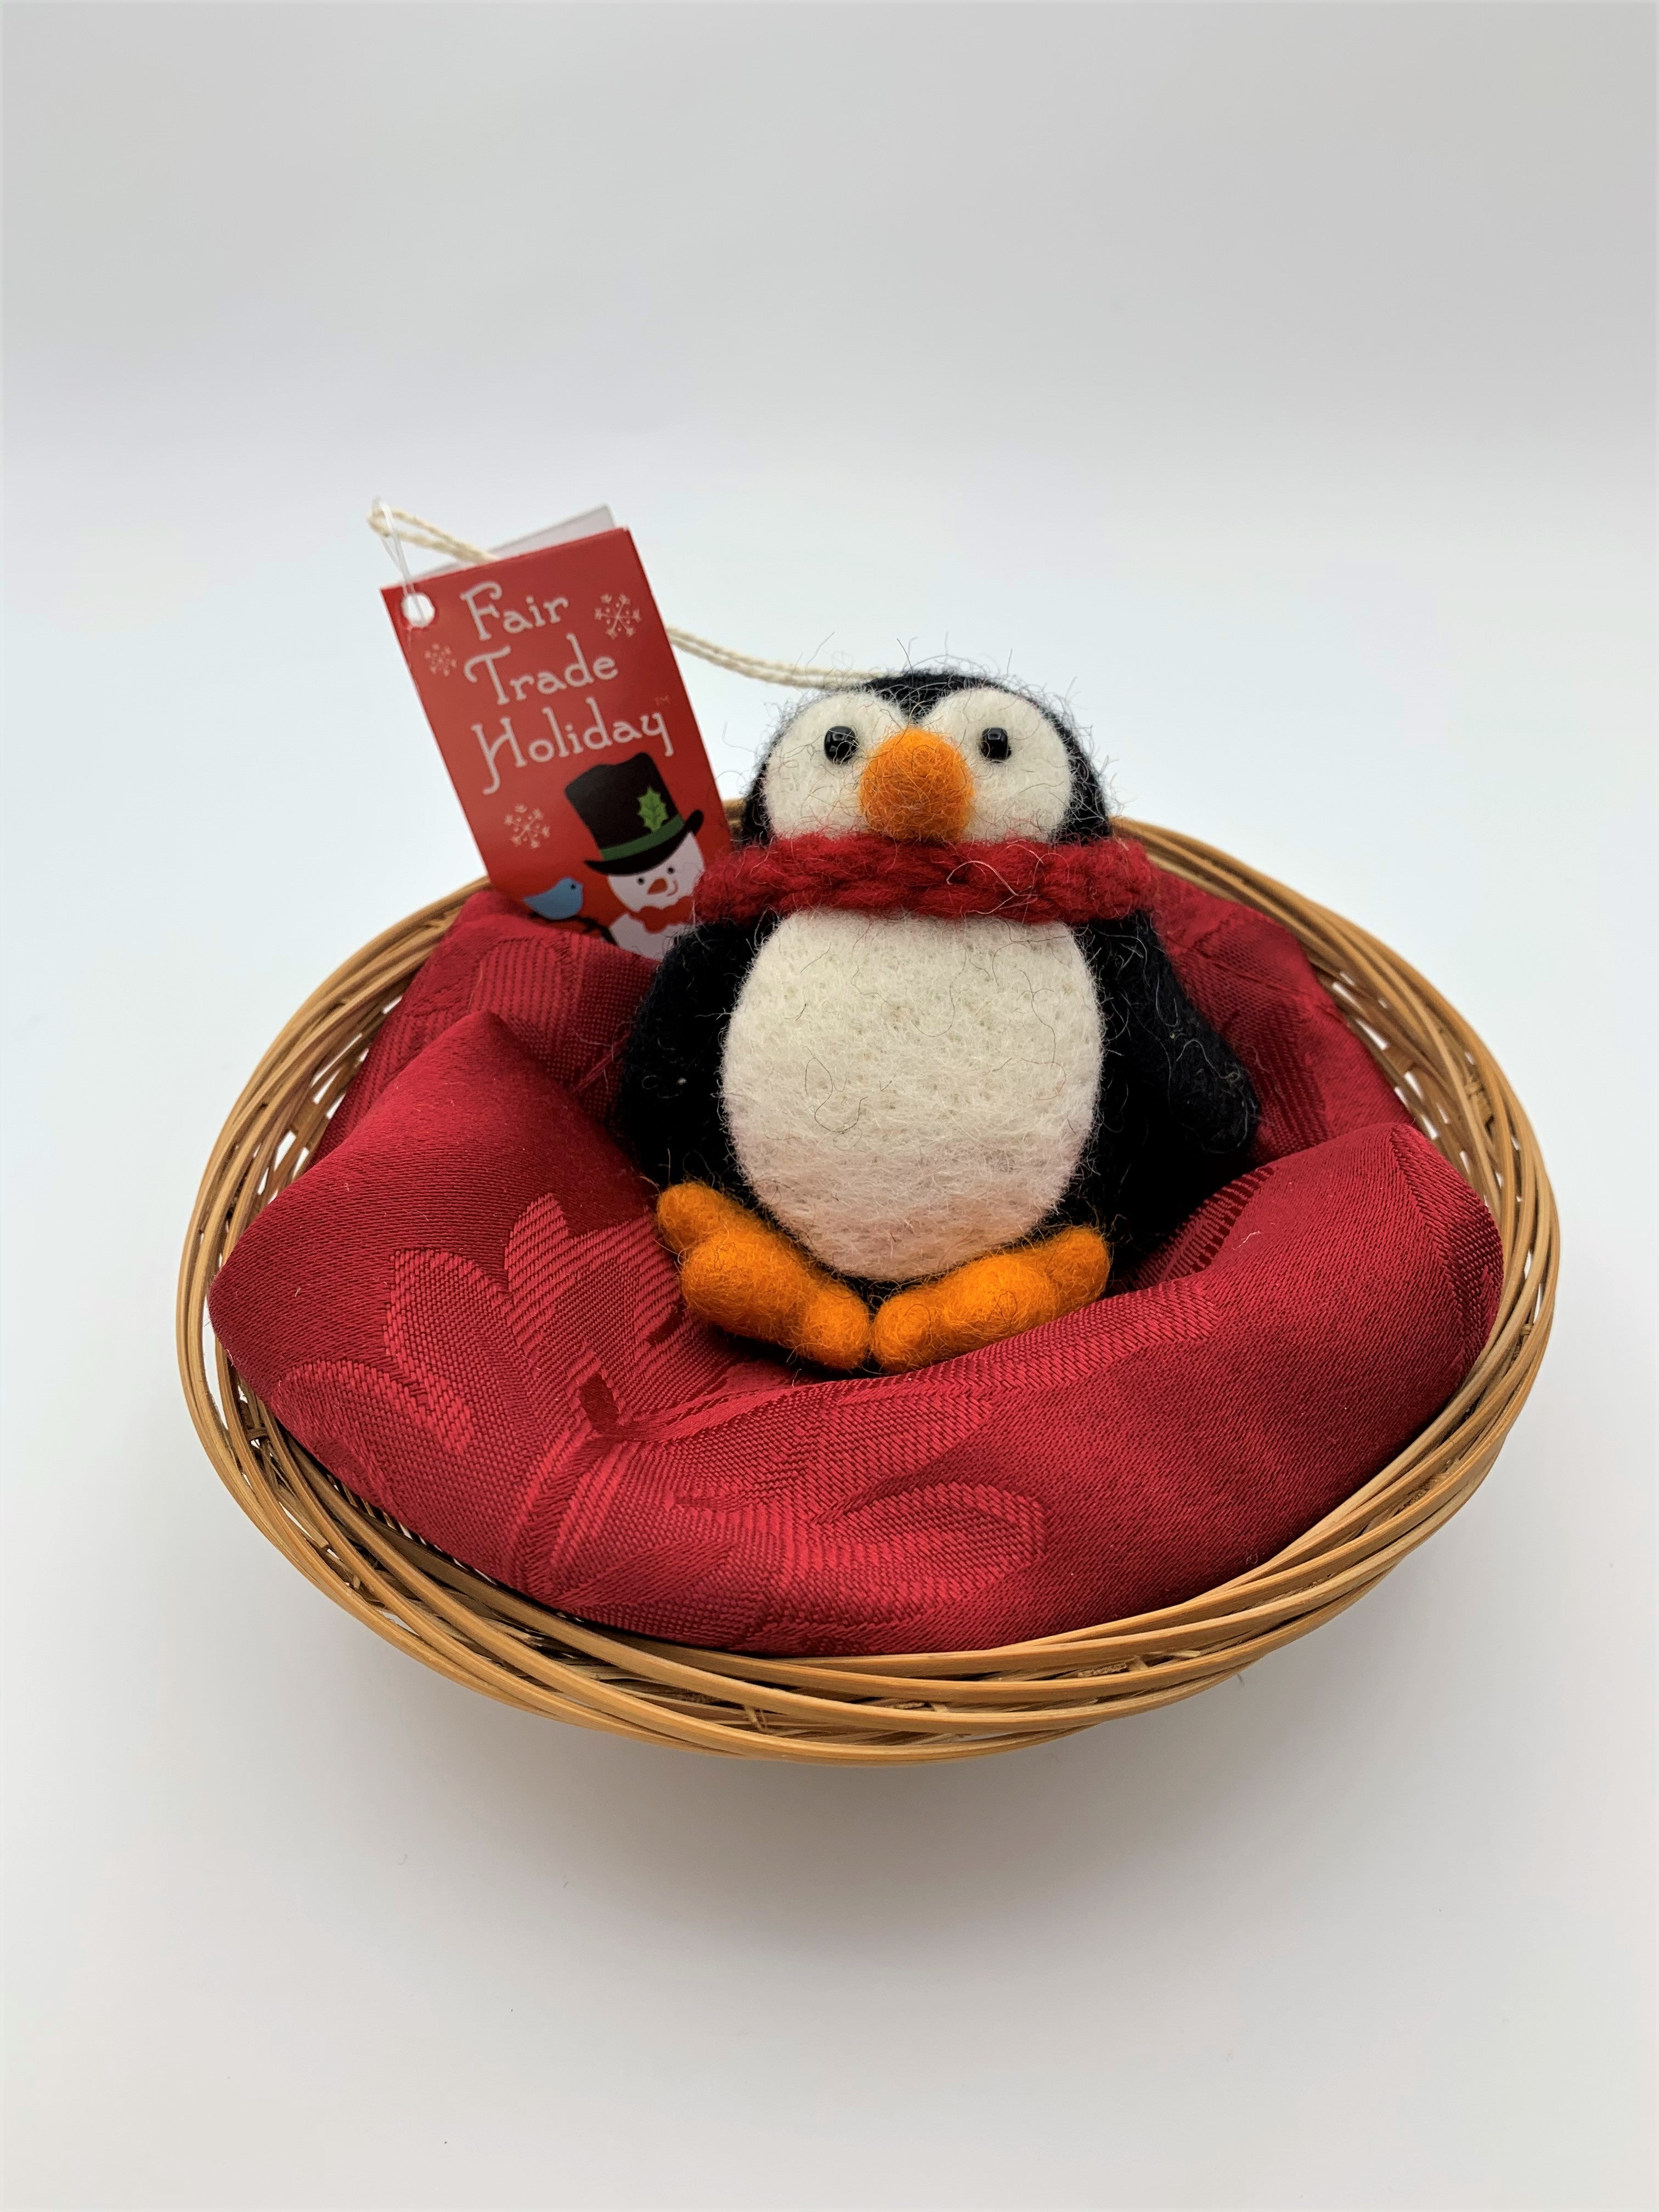 This the Pokey penguin Christmas ornament.  It is handcrafted (fair trade), made of 100% hand-felted natural wool, is black and white and a little chubby, with an orange beak and feet, wearing a red winter scarf. Approximately 3.5"x3".  He comes with a detachable fair trade holiday tag to use if you are giving this as a gift. 